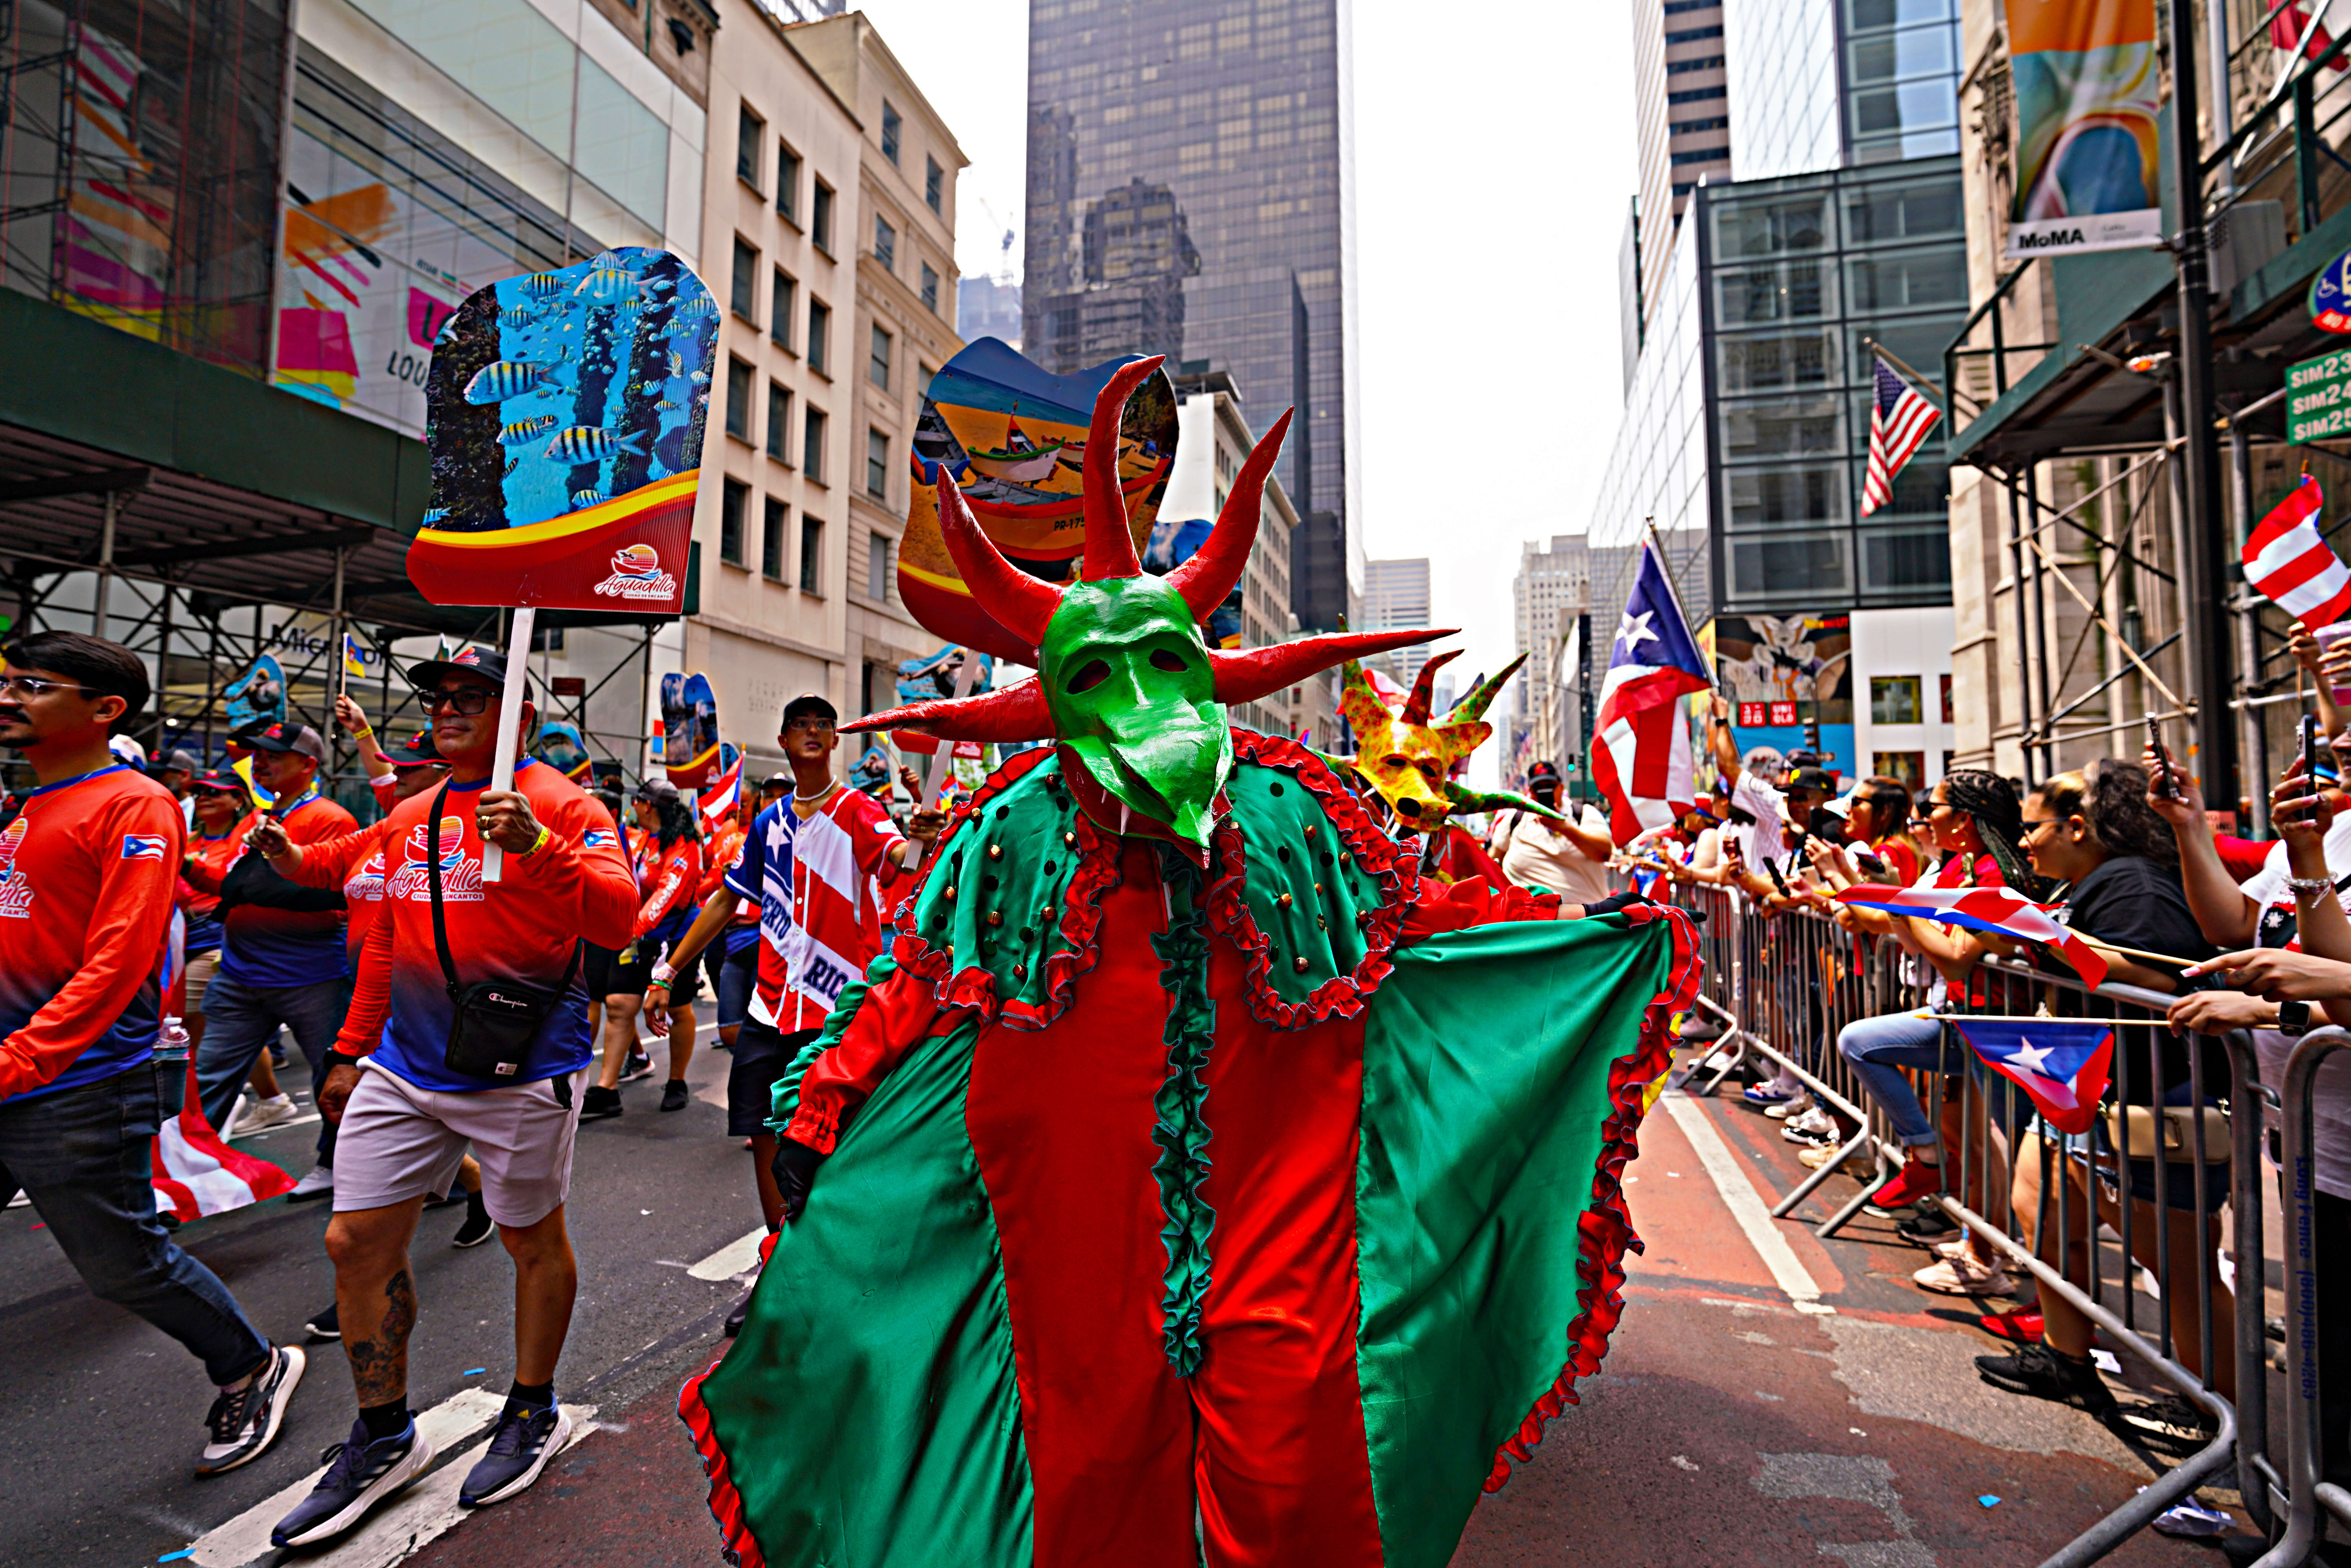 La isla bonita Thousands cheer for 66th annual Puerto Rican Day Parade in Midtown amNewYork pic